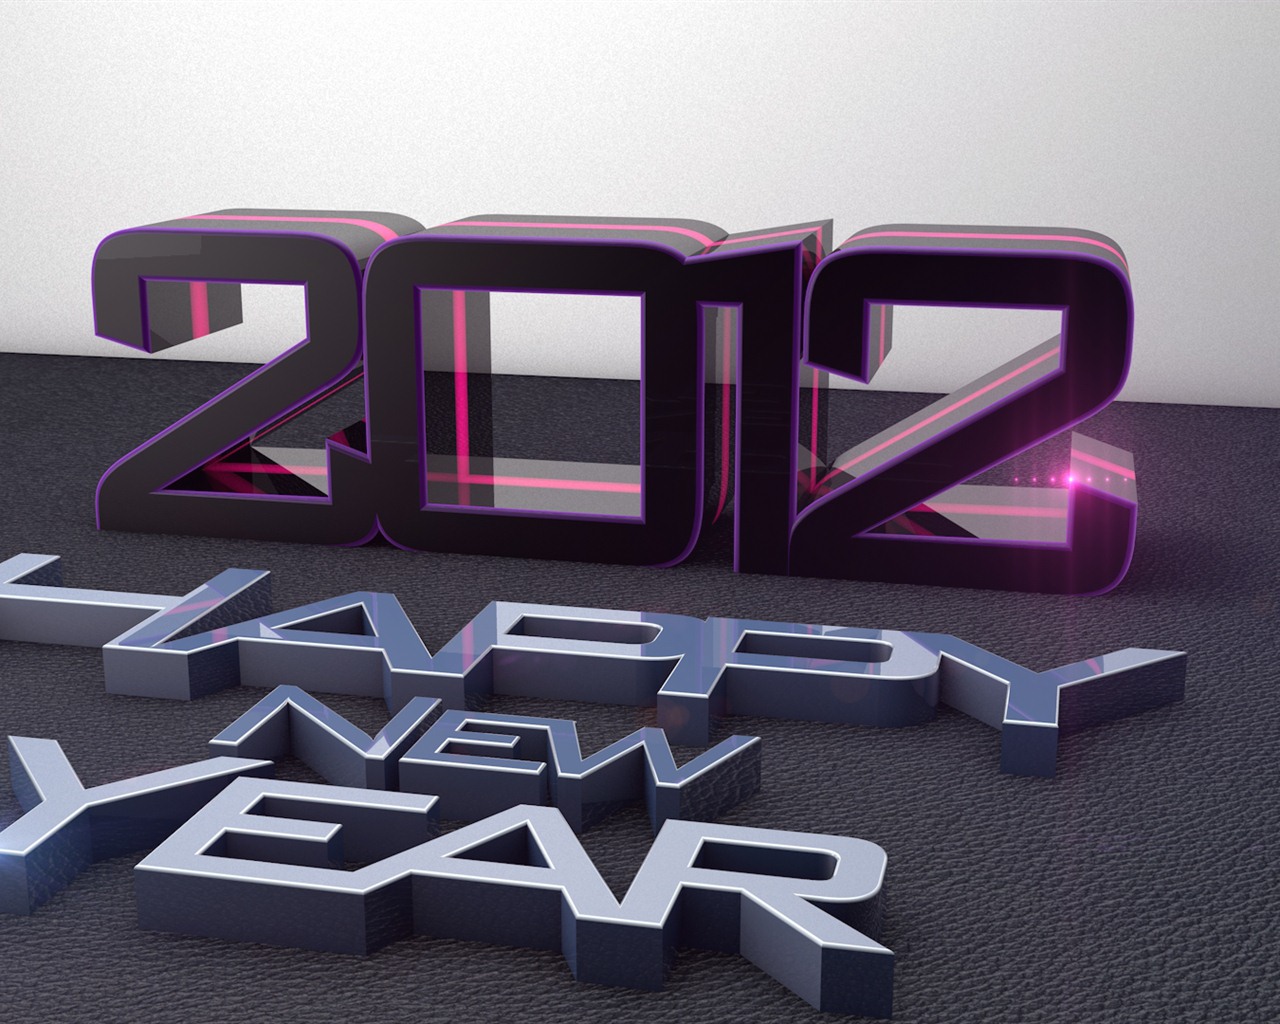 2012 New Year wallpapers (1) #6 - 1280x1024